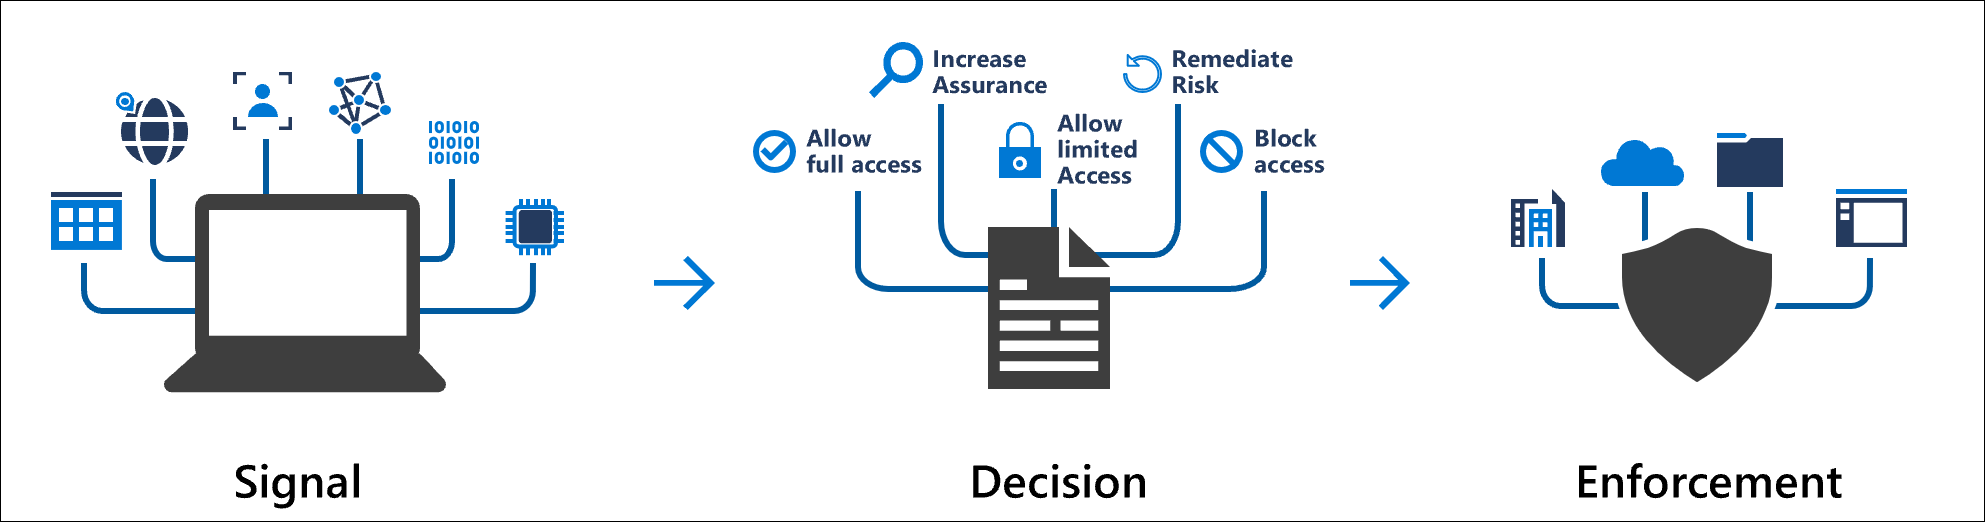 What is Conditional Access in Azure Active Directory? | Microsoft Docs